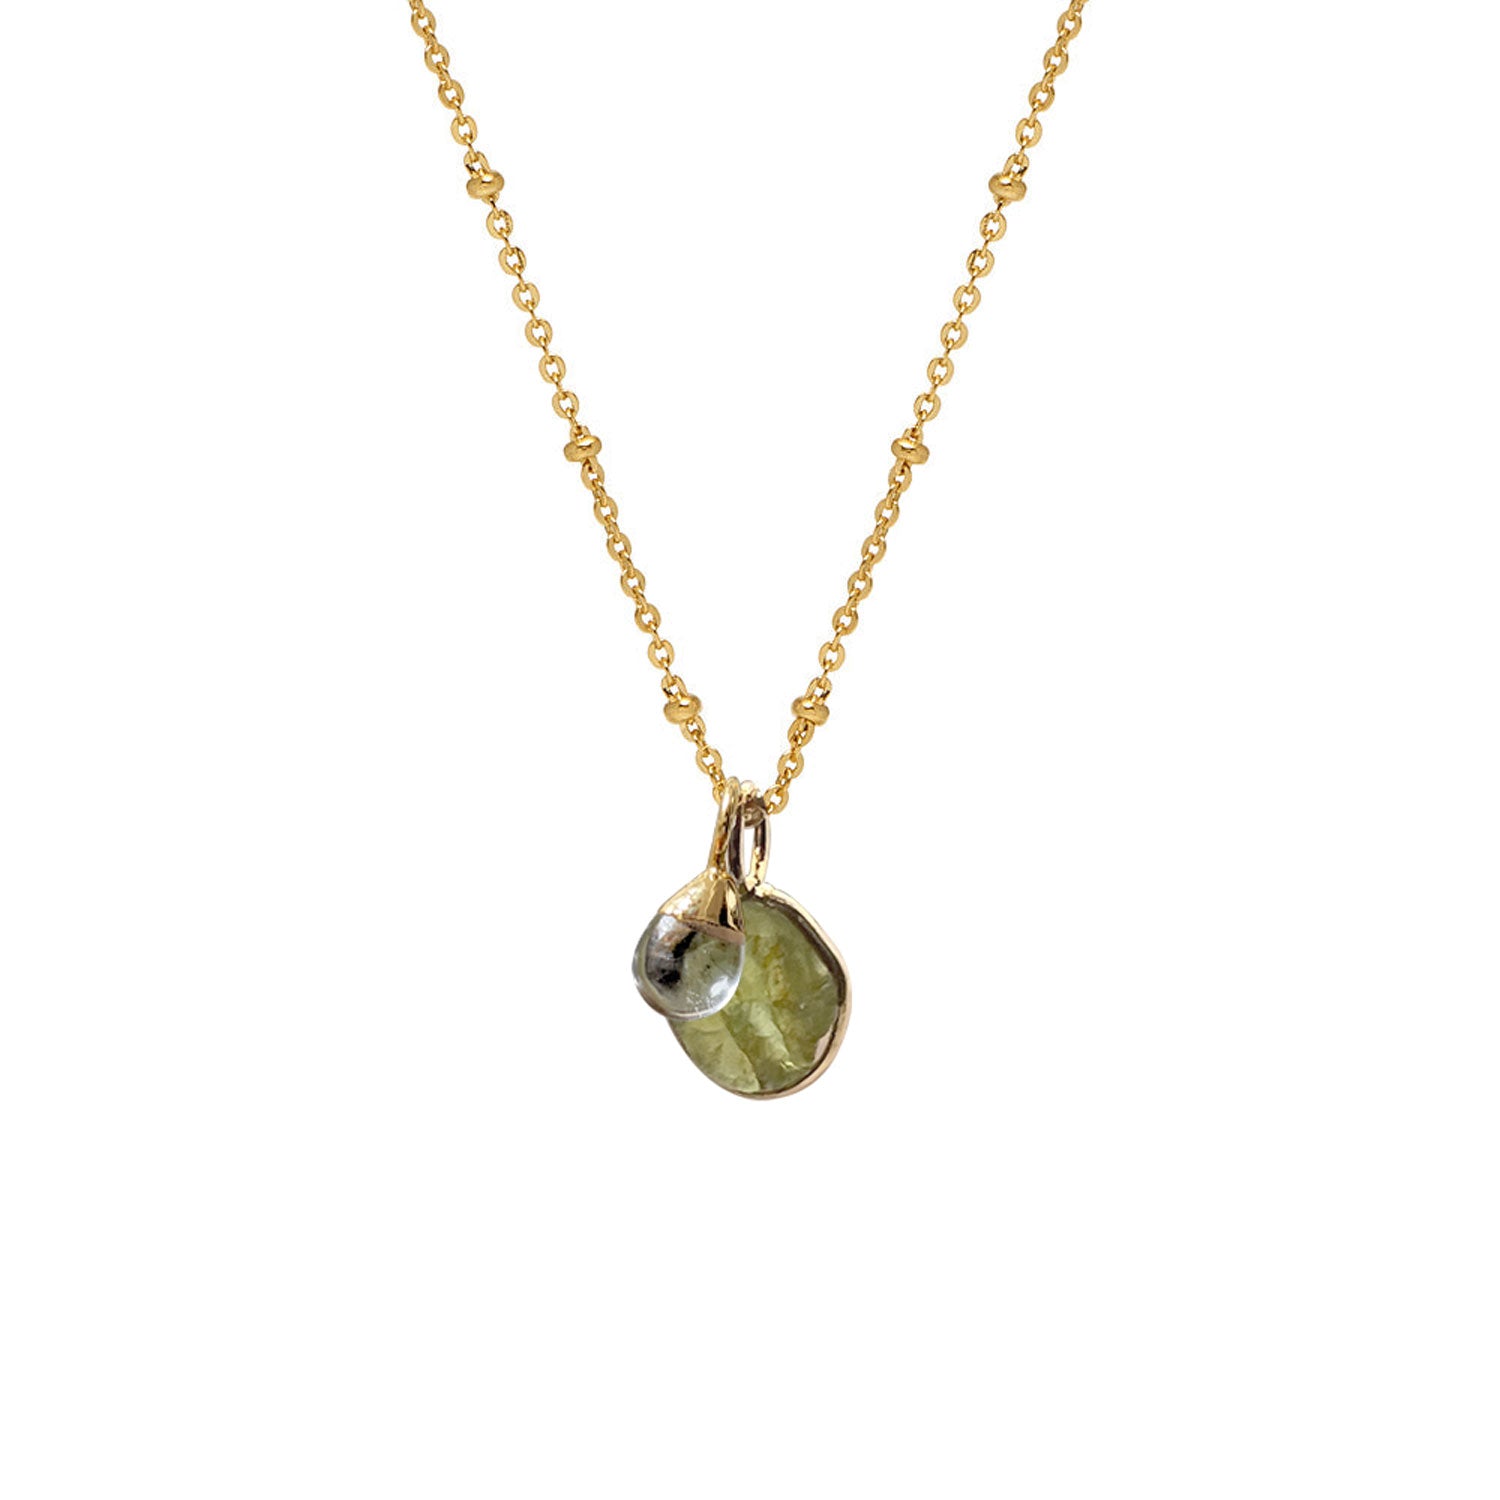 Freeform Raw Peridot slice with Smooth Rock Crystal Drop on Satellite chain